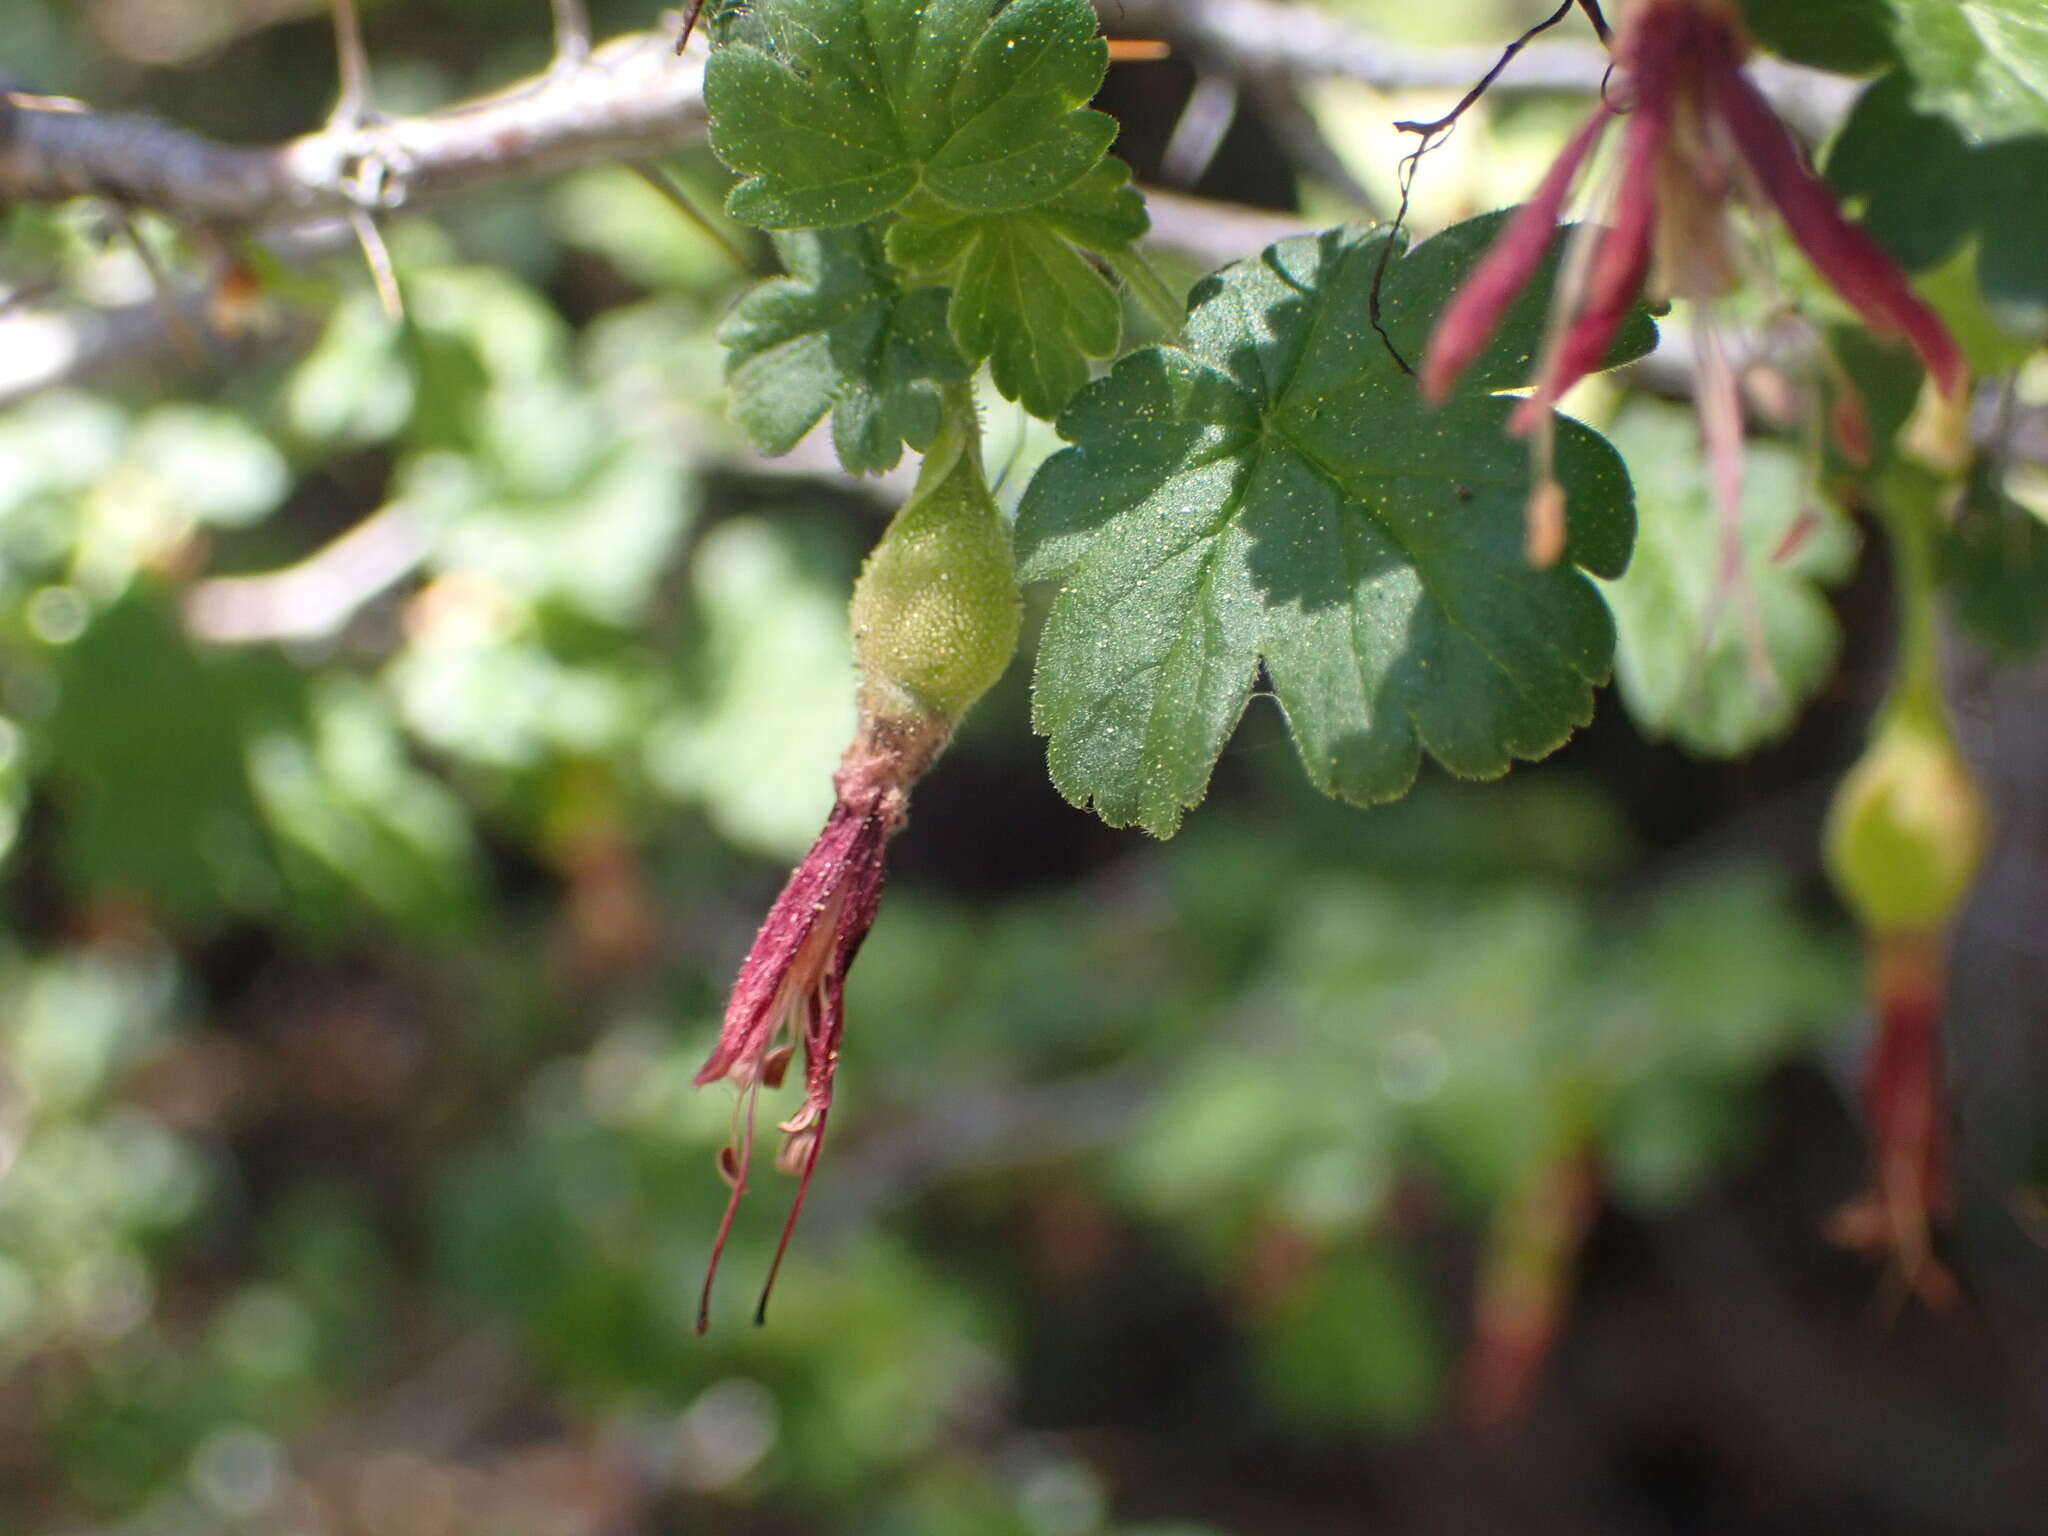 Image of shinyleaf currant